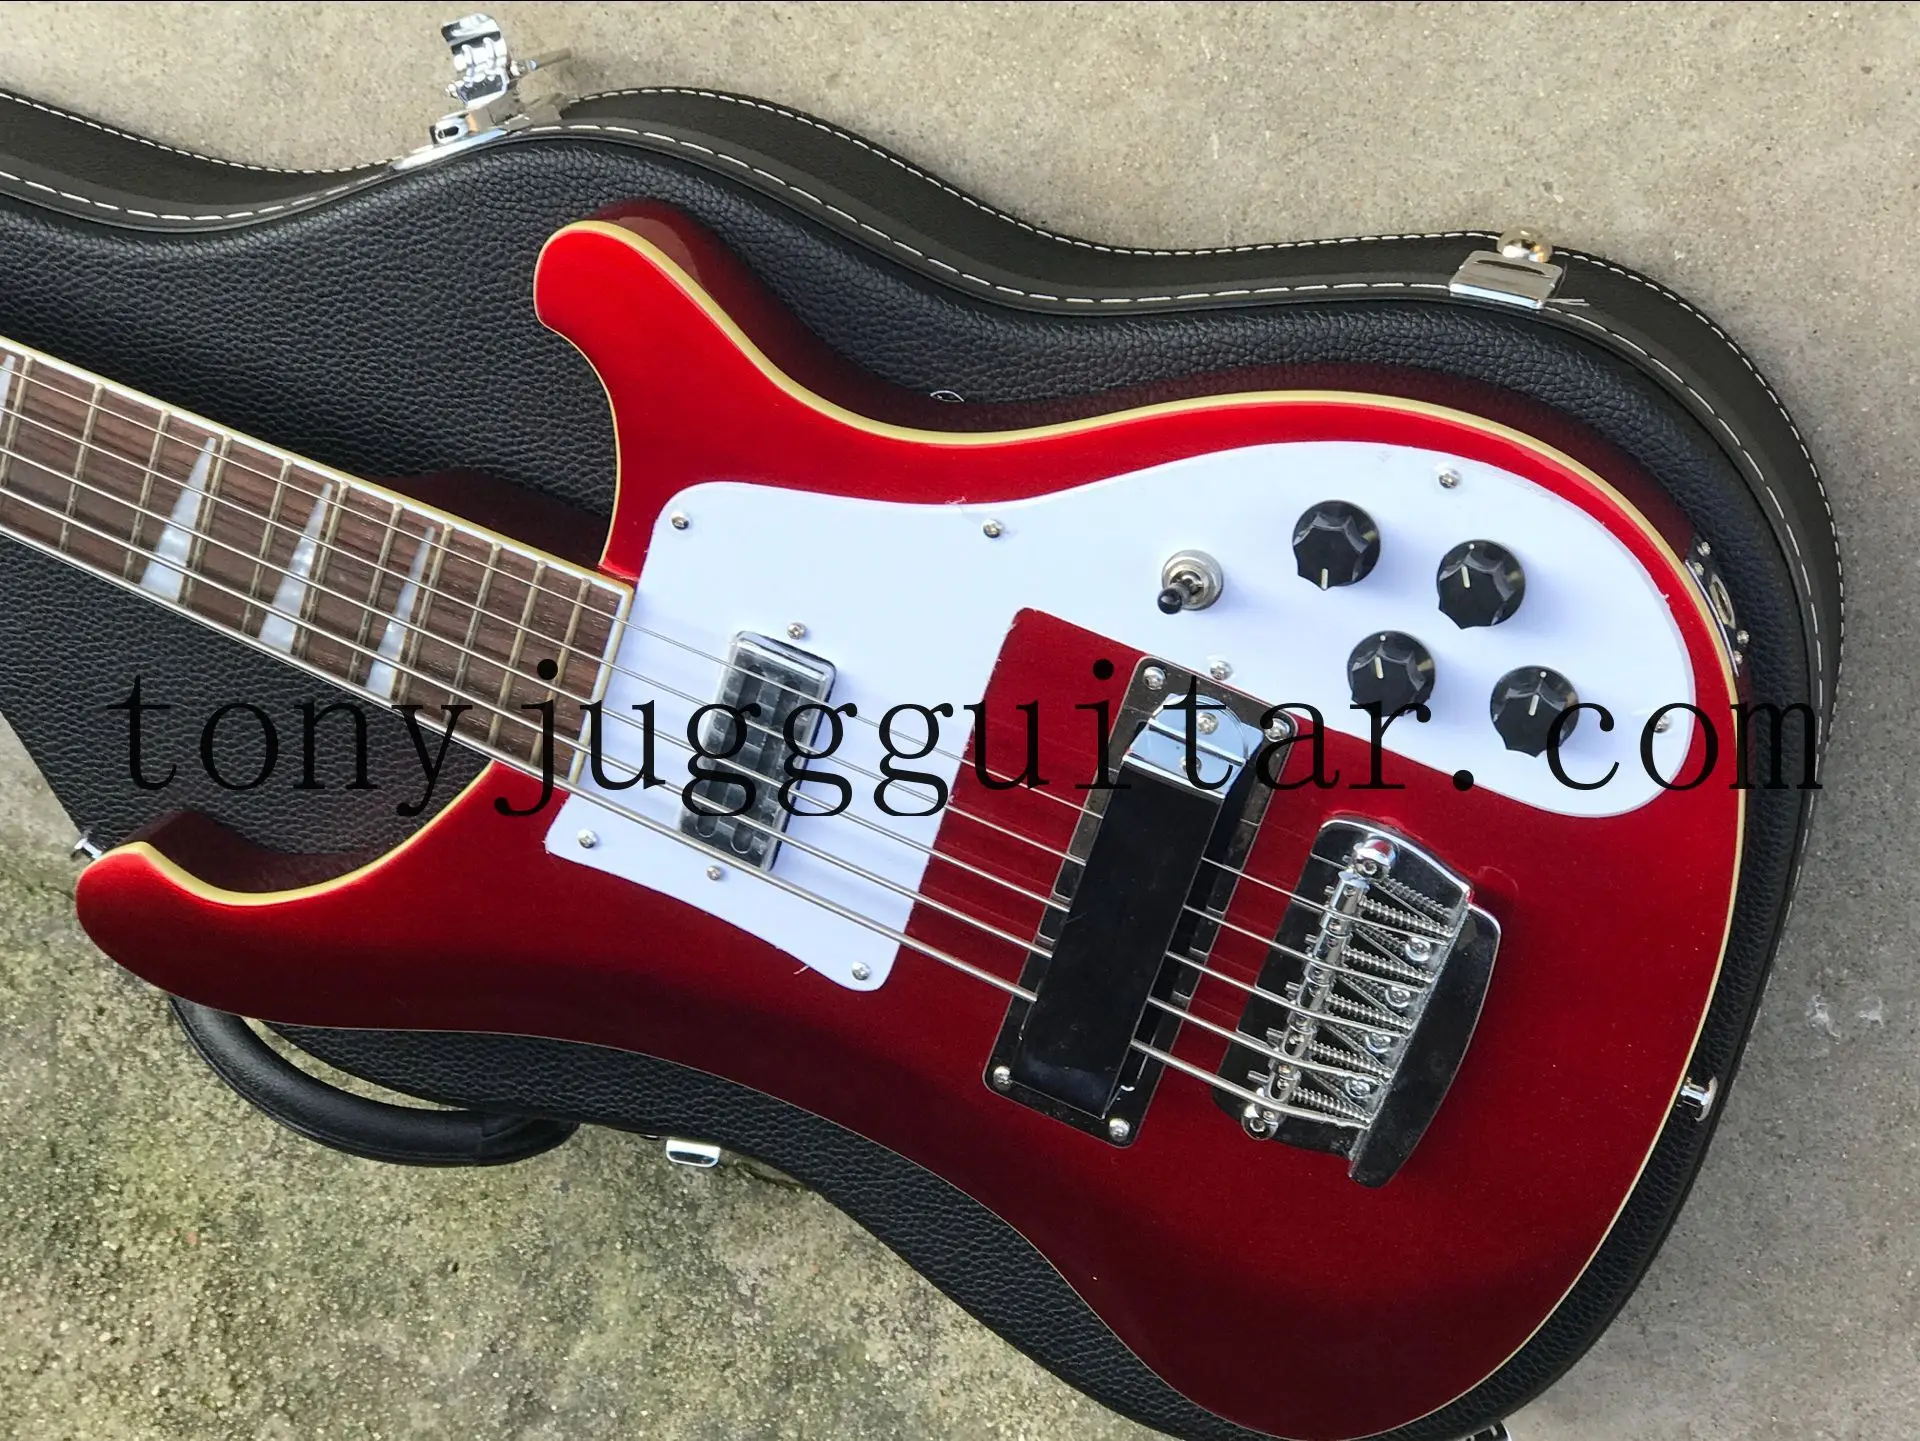 

5 Strings 4003 Fire glo Metallic Red Electric Bass Guitar Chrome Hardware, White Pearloid Triangle Fingerboard Inlay